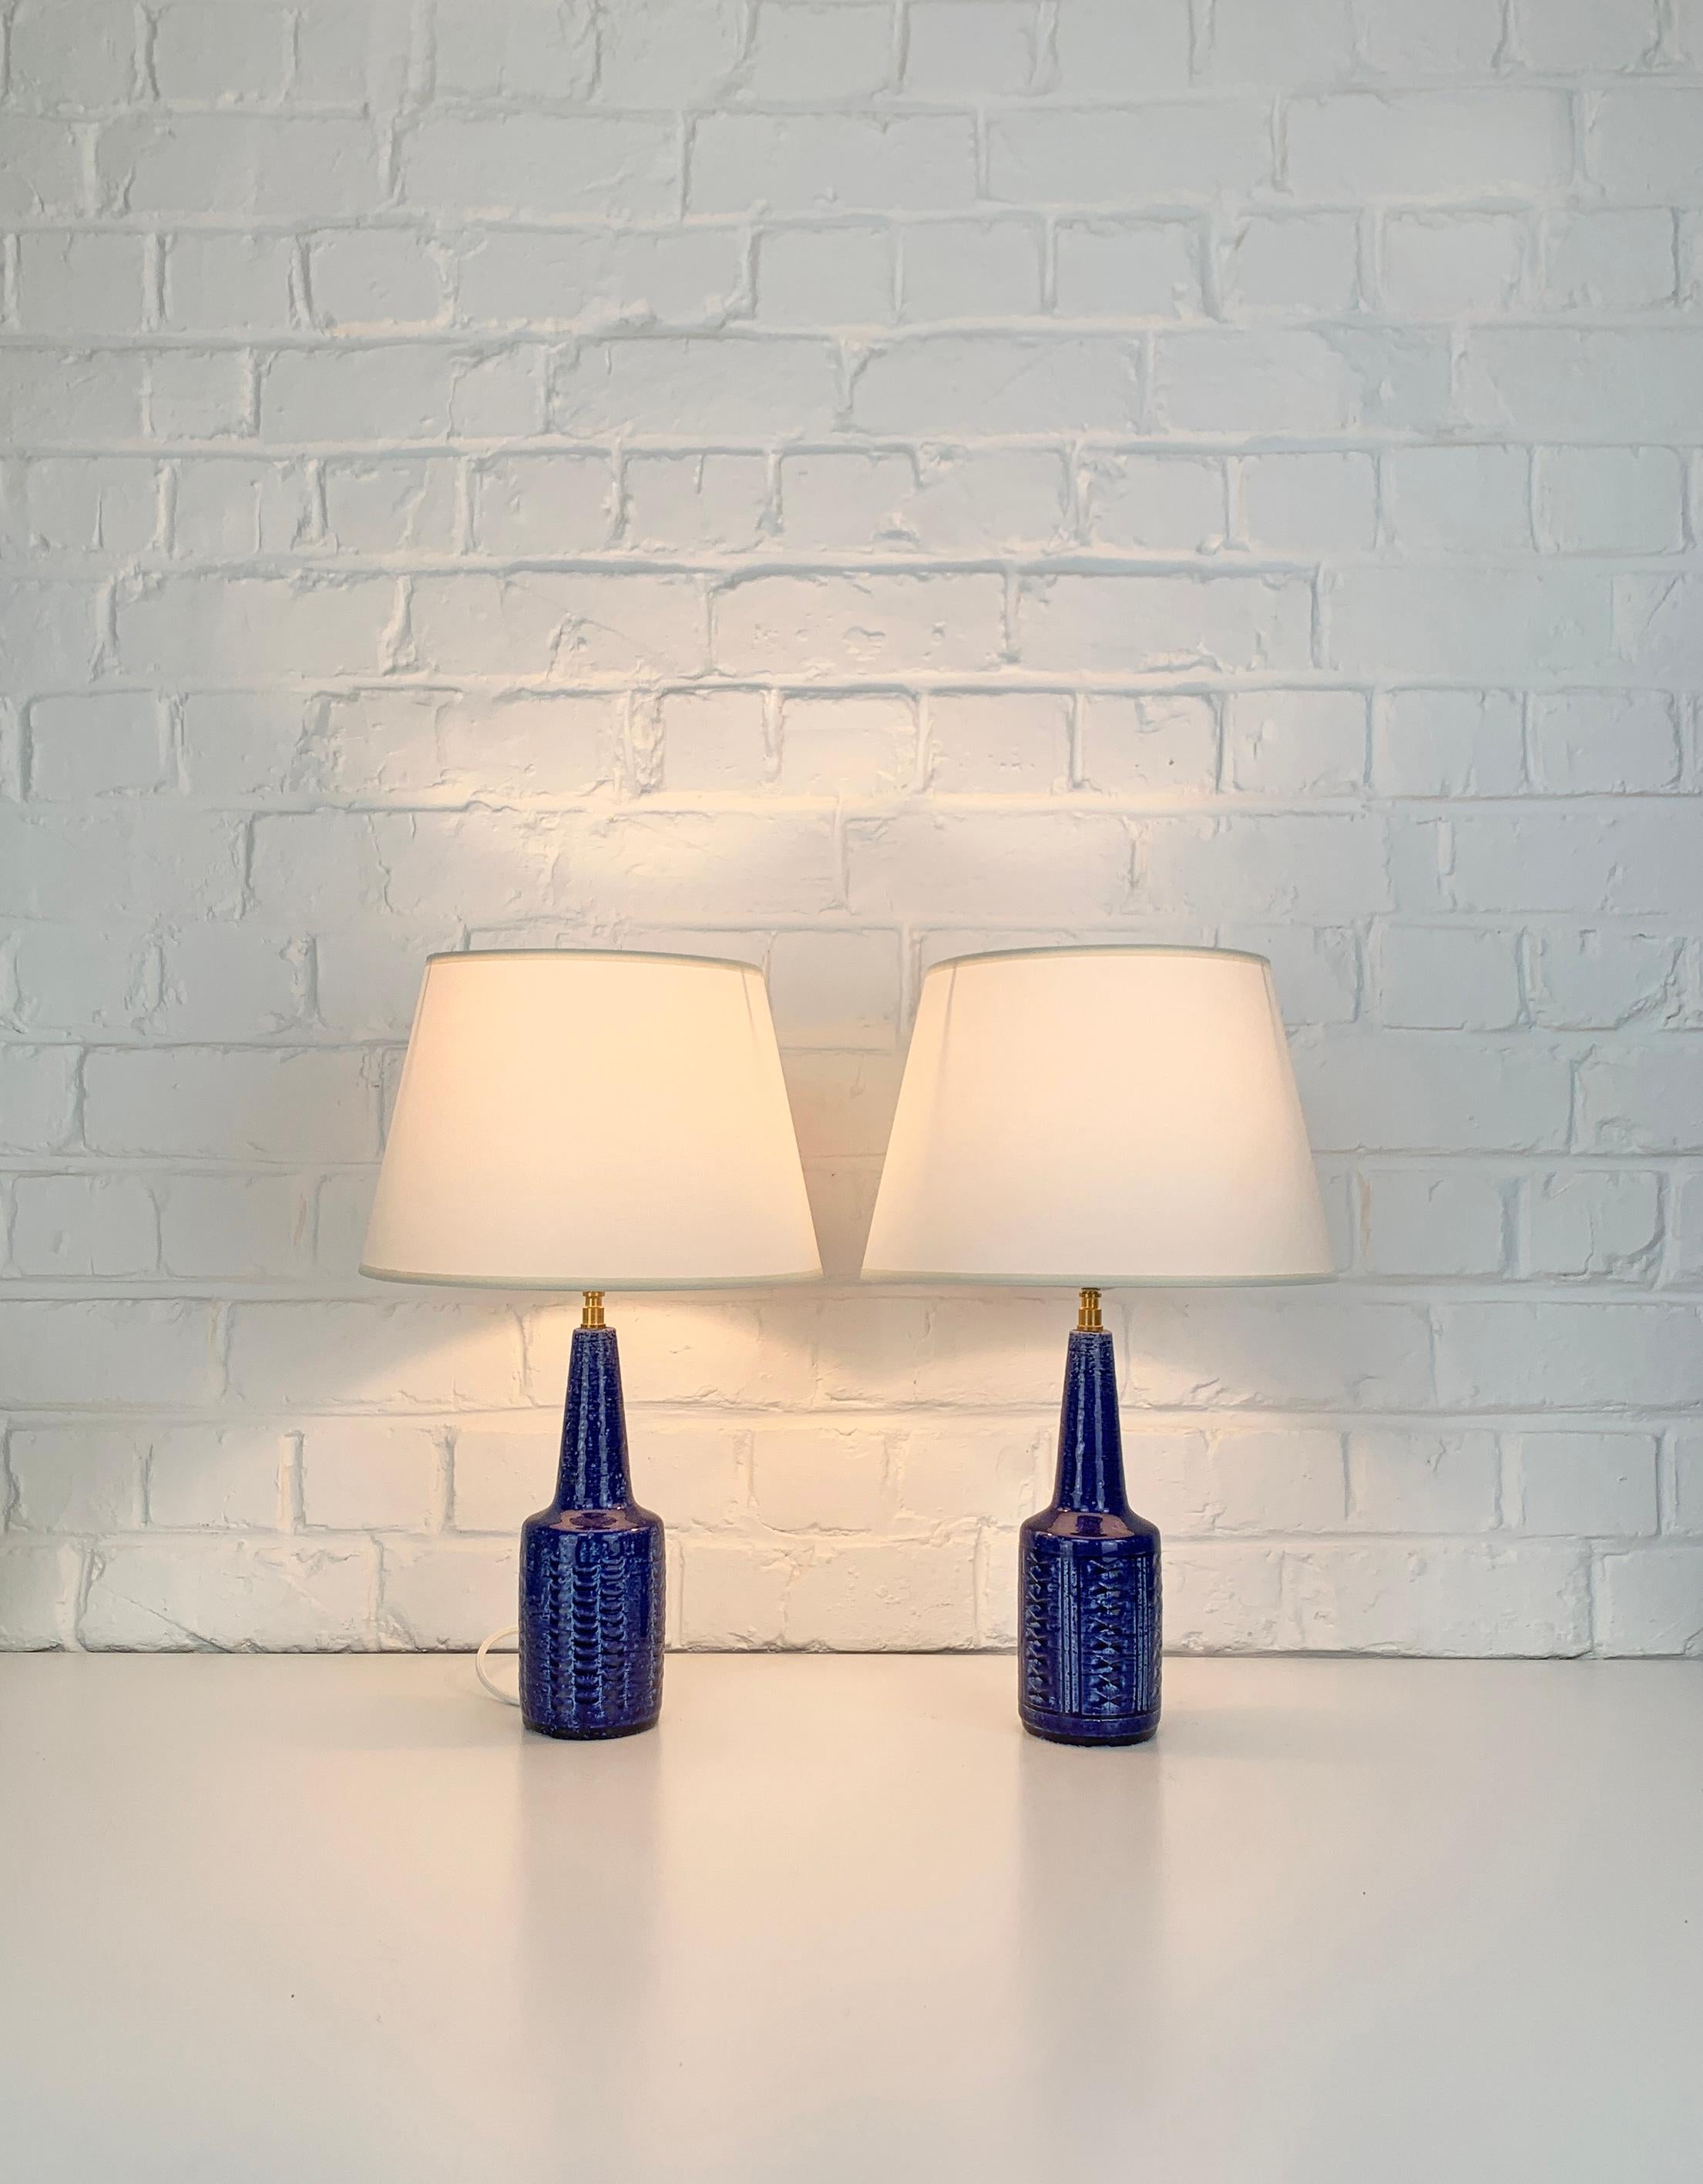 Pair small stoneware table lamps, model DL29, produced by Palshus (Denmark). 

The lamp bases are finished with a blue glaze and impressed pattern. The chamotte clay gives a natural and living surface. Both are signed under the base (PLS for Per